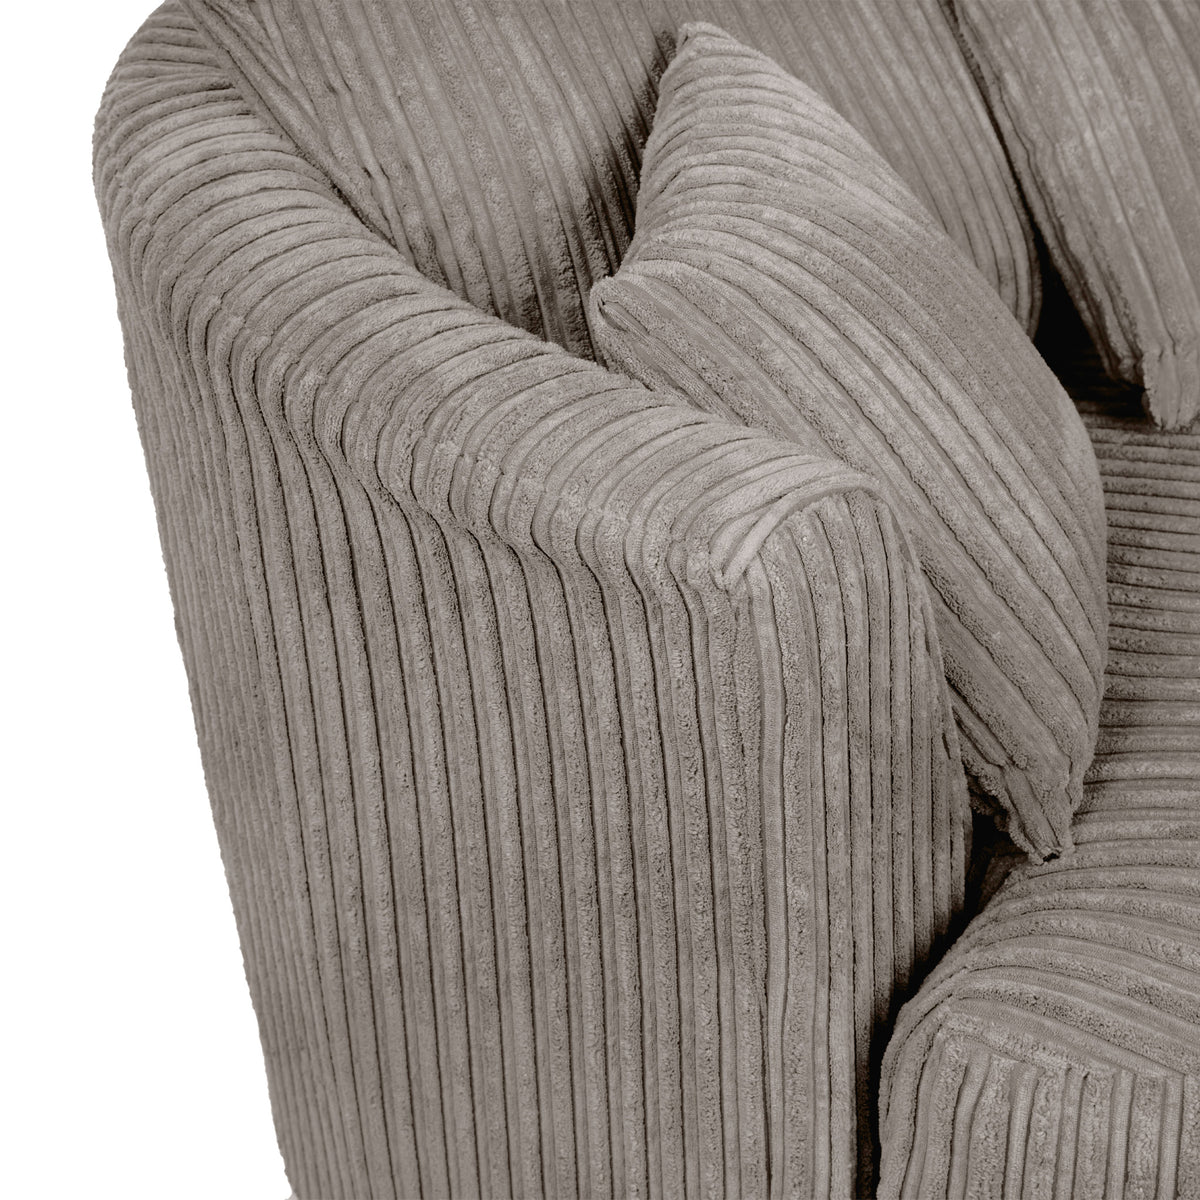 Bletchley Charcoal Jumbo Cord Swivel Chair from Roseland Furniture